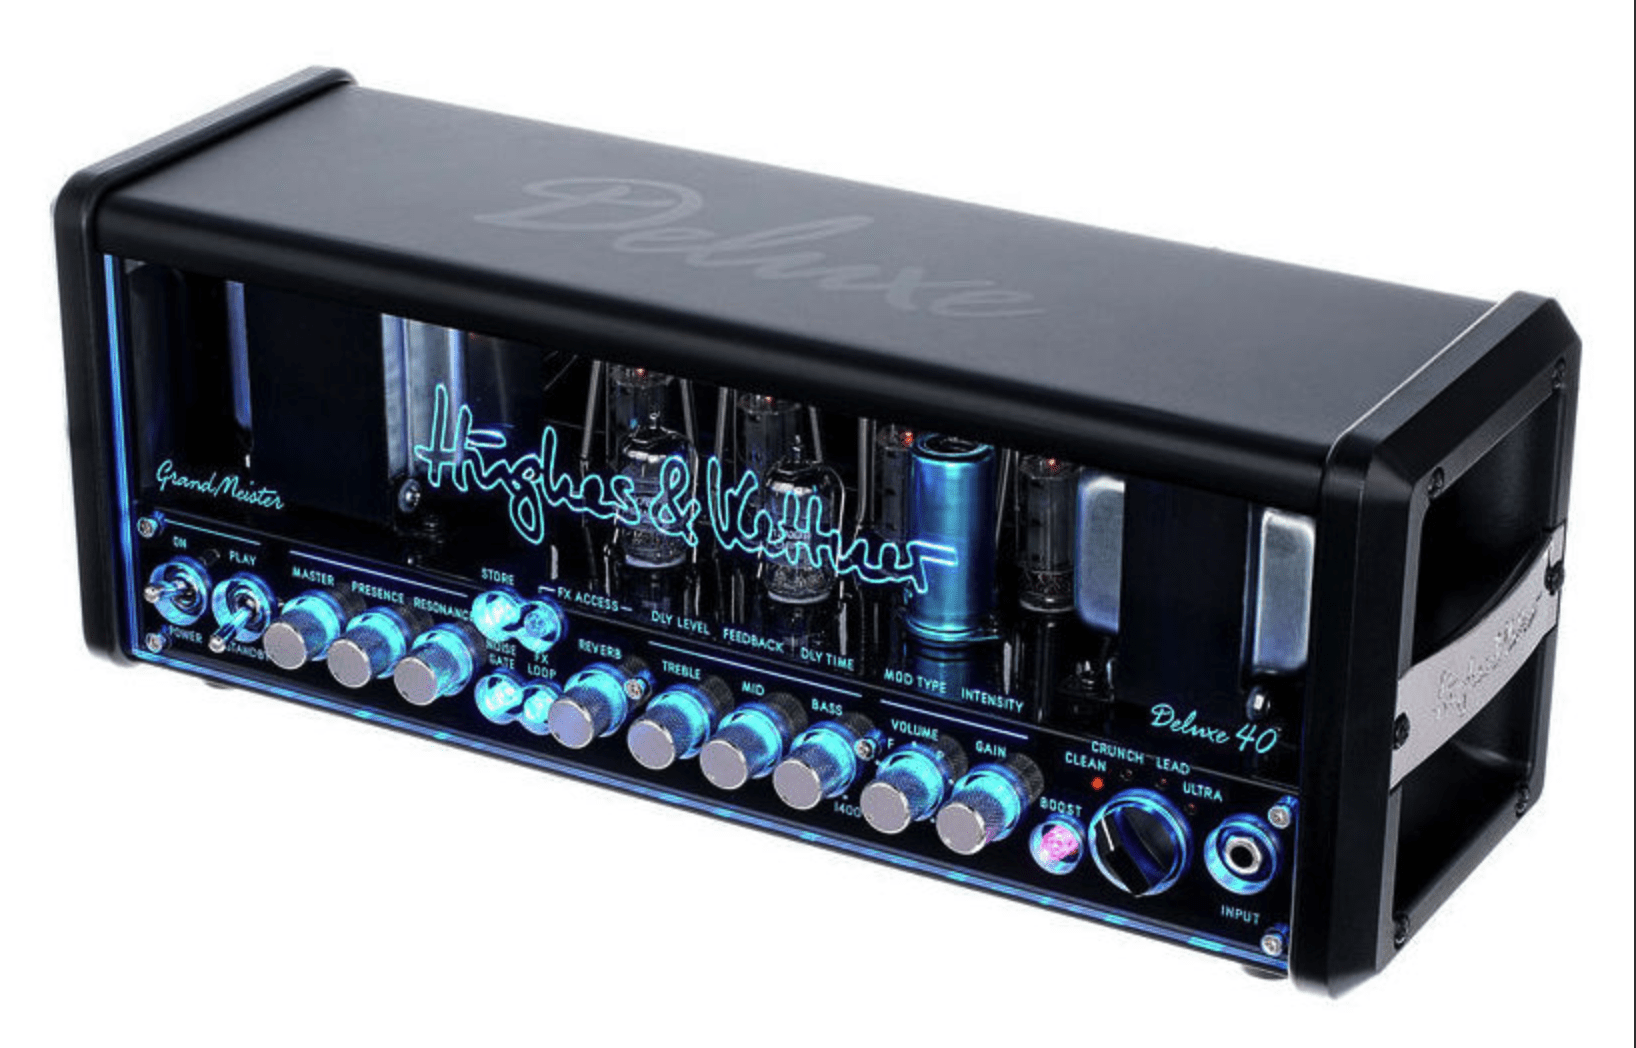 Hughes & Kettner GrandMeister Deluxe with iPad control and blue